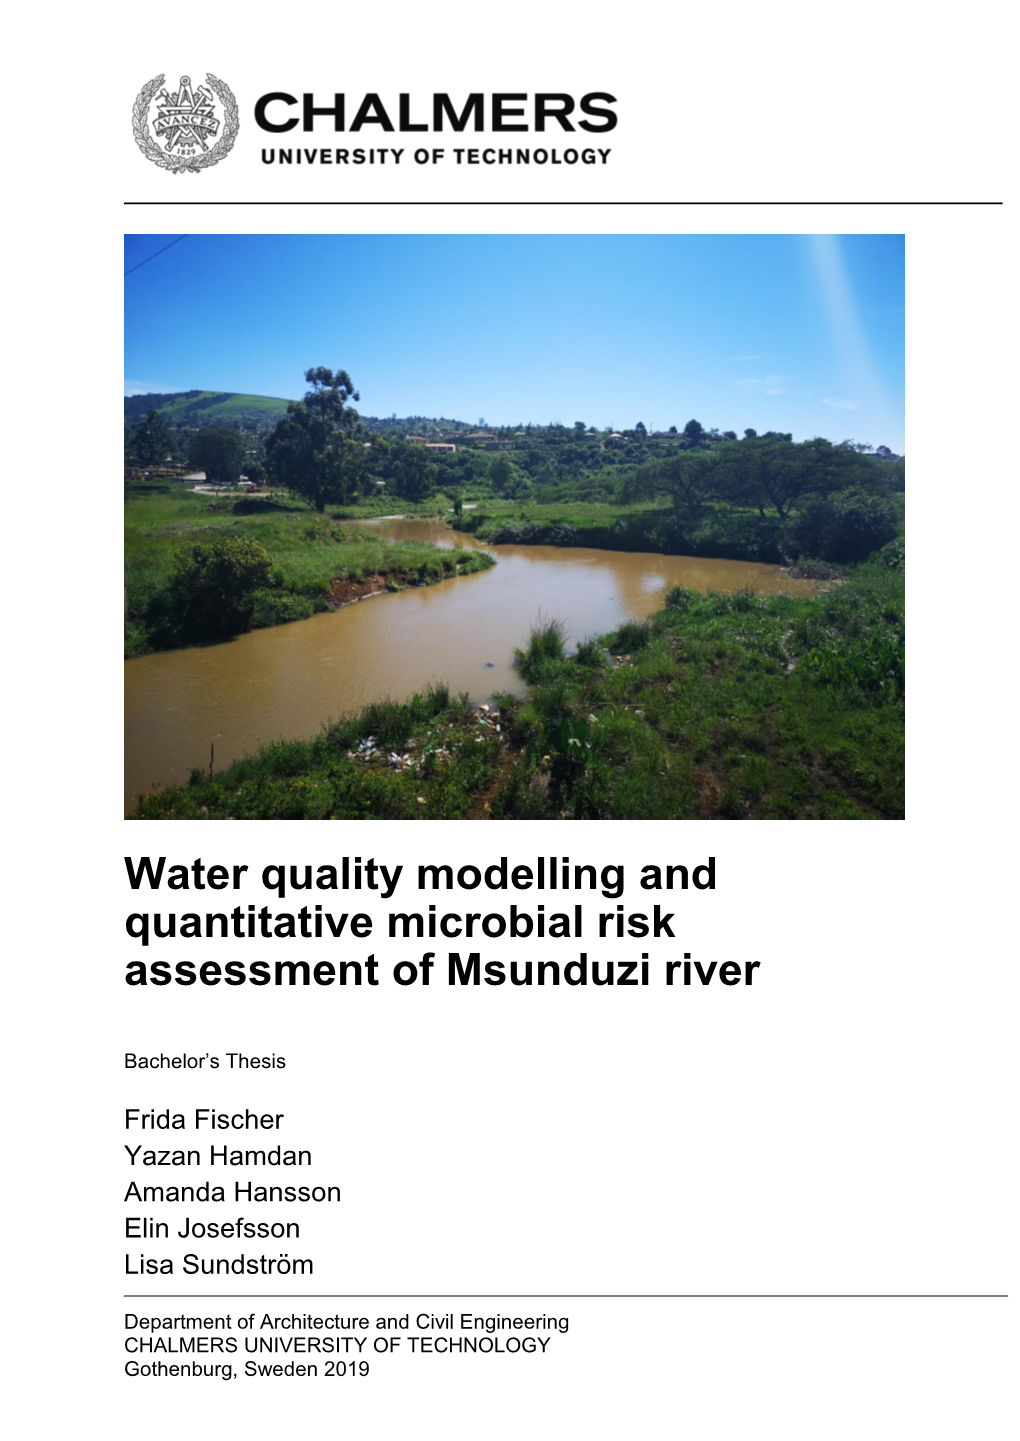 Water Quality Modelling and Quantitative Microbial Risk Assessment of Msunduzi River